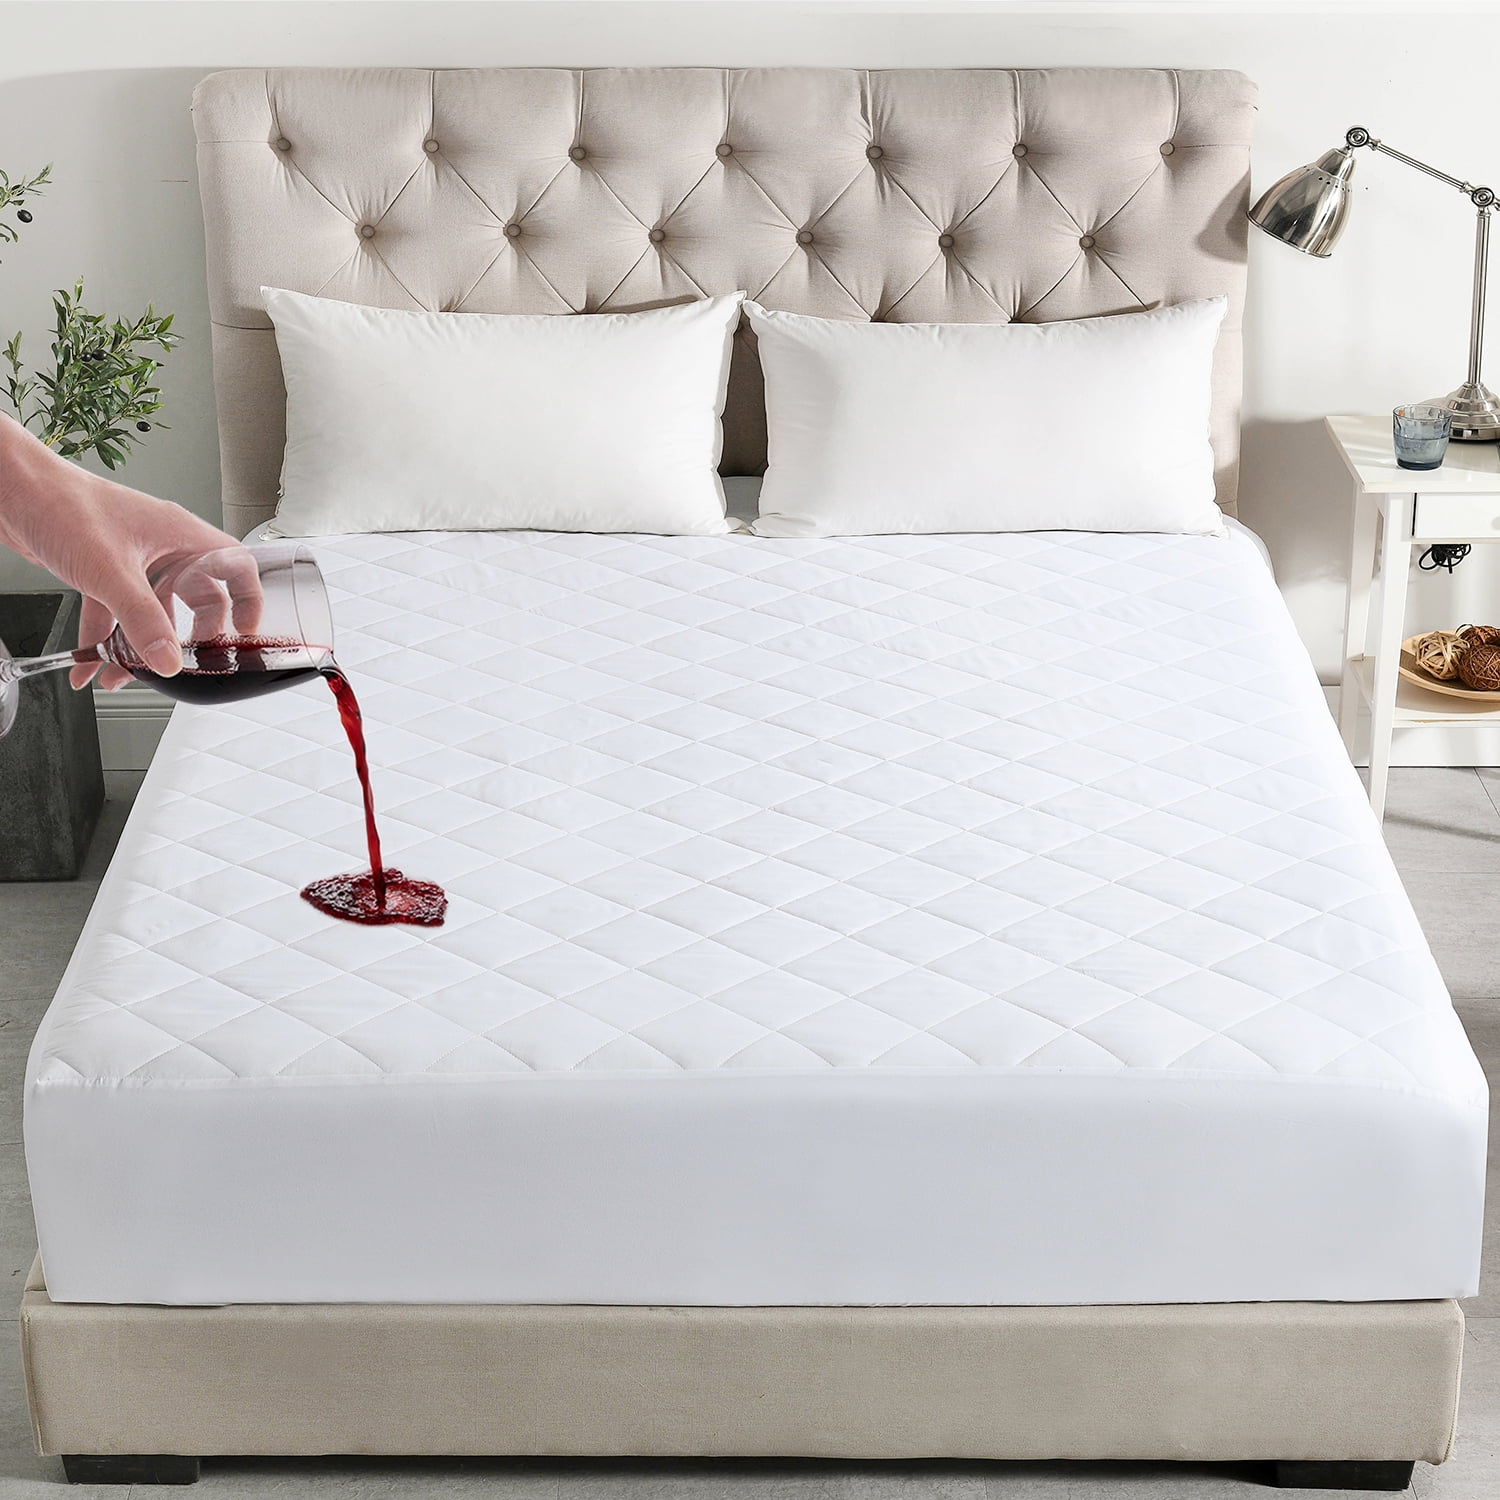 Quilted Mattress Pad Deep Pocket Fitted Protector Microfiber Extra Comfort Cover 